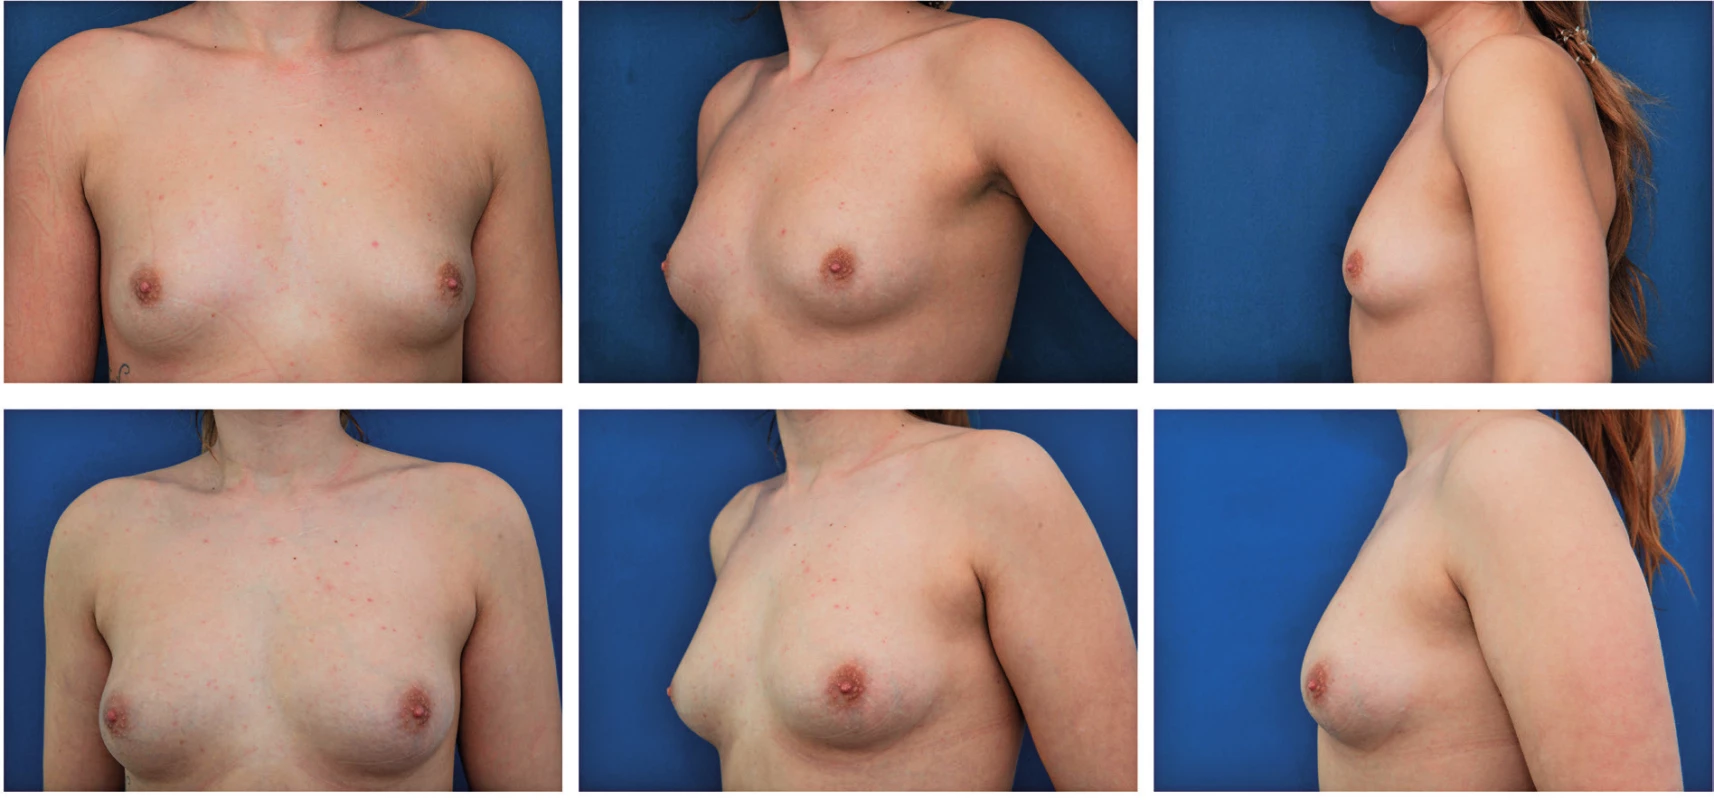 Patient before and 6 months after one session of autologous fat breast augmentation